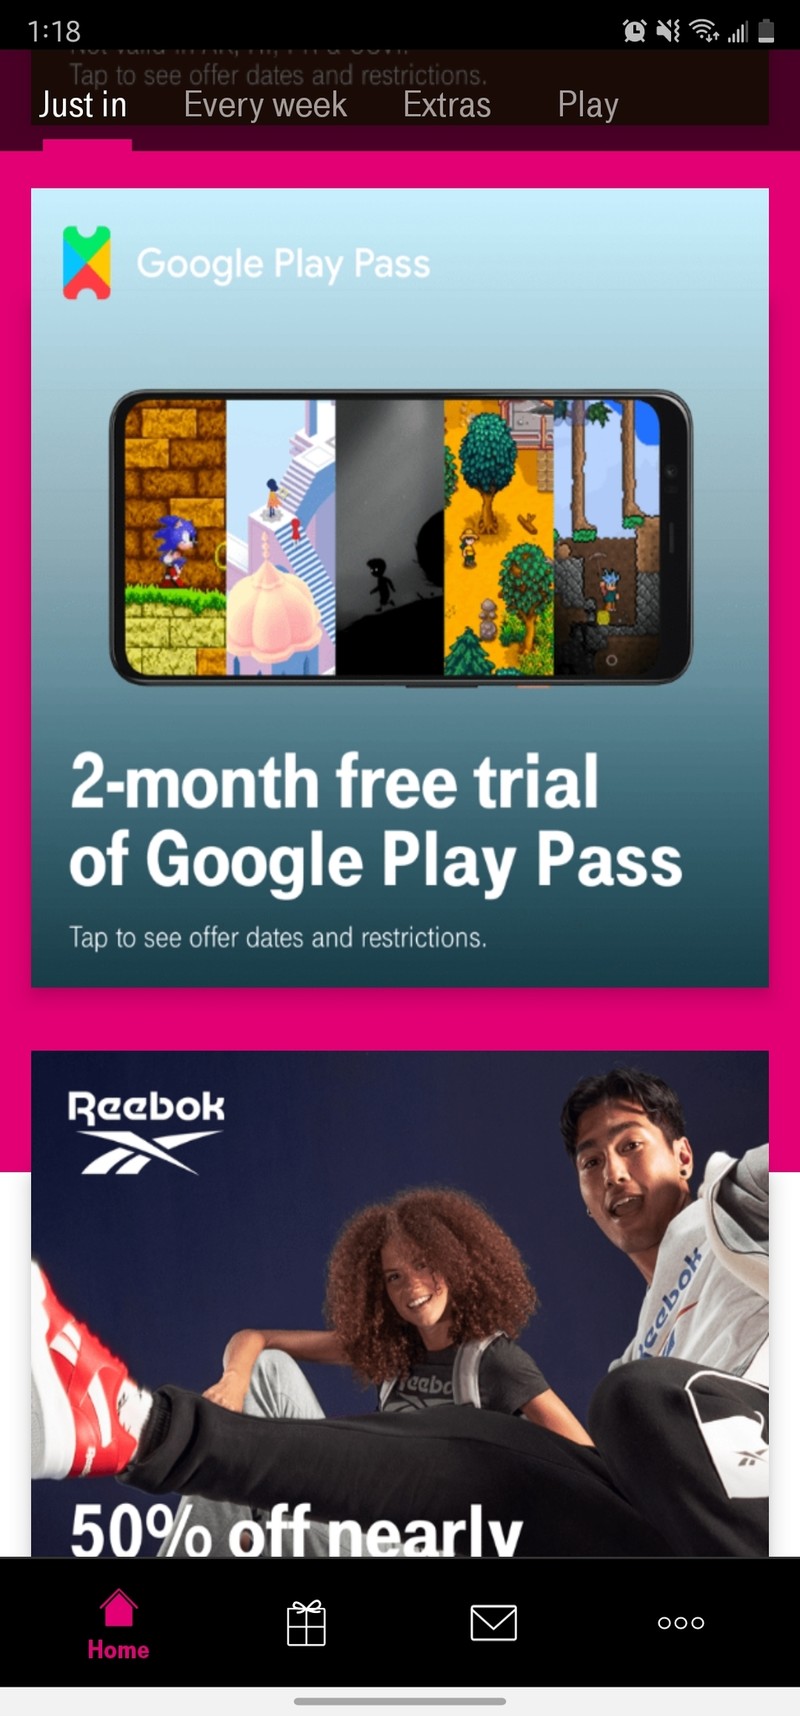 TMobile customers get two free months of Google Play Pass for a